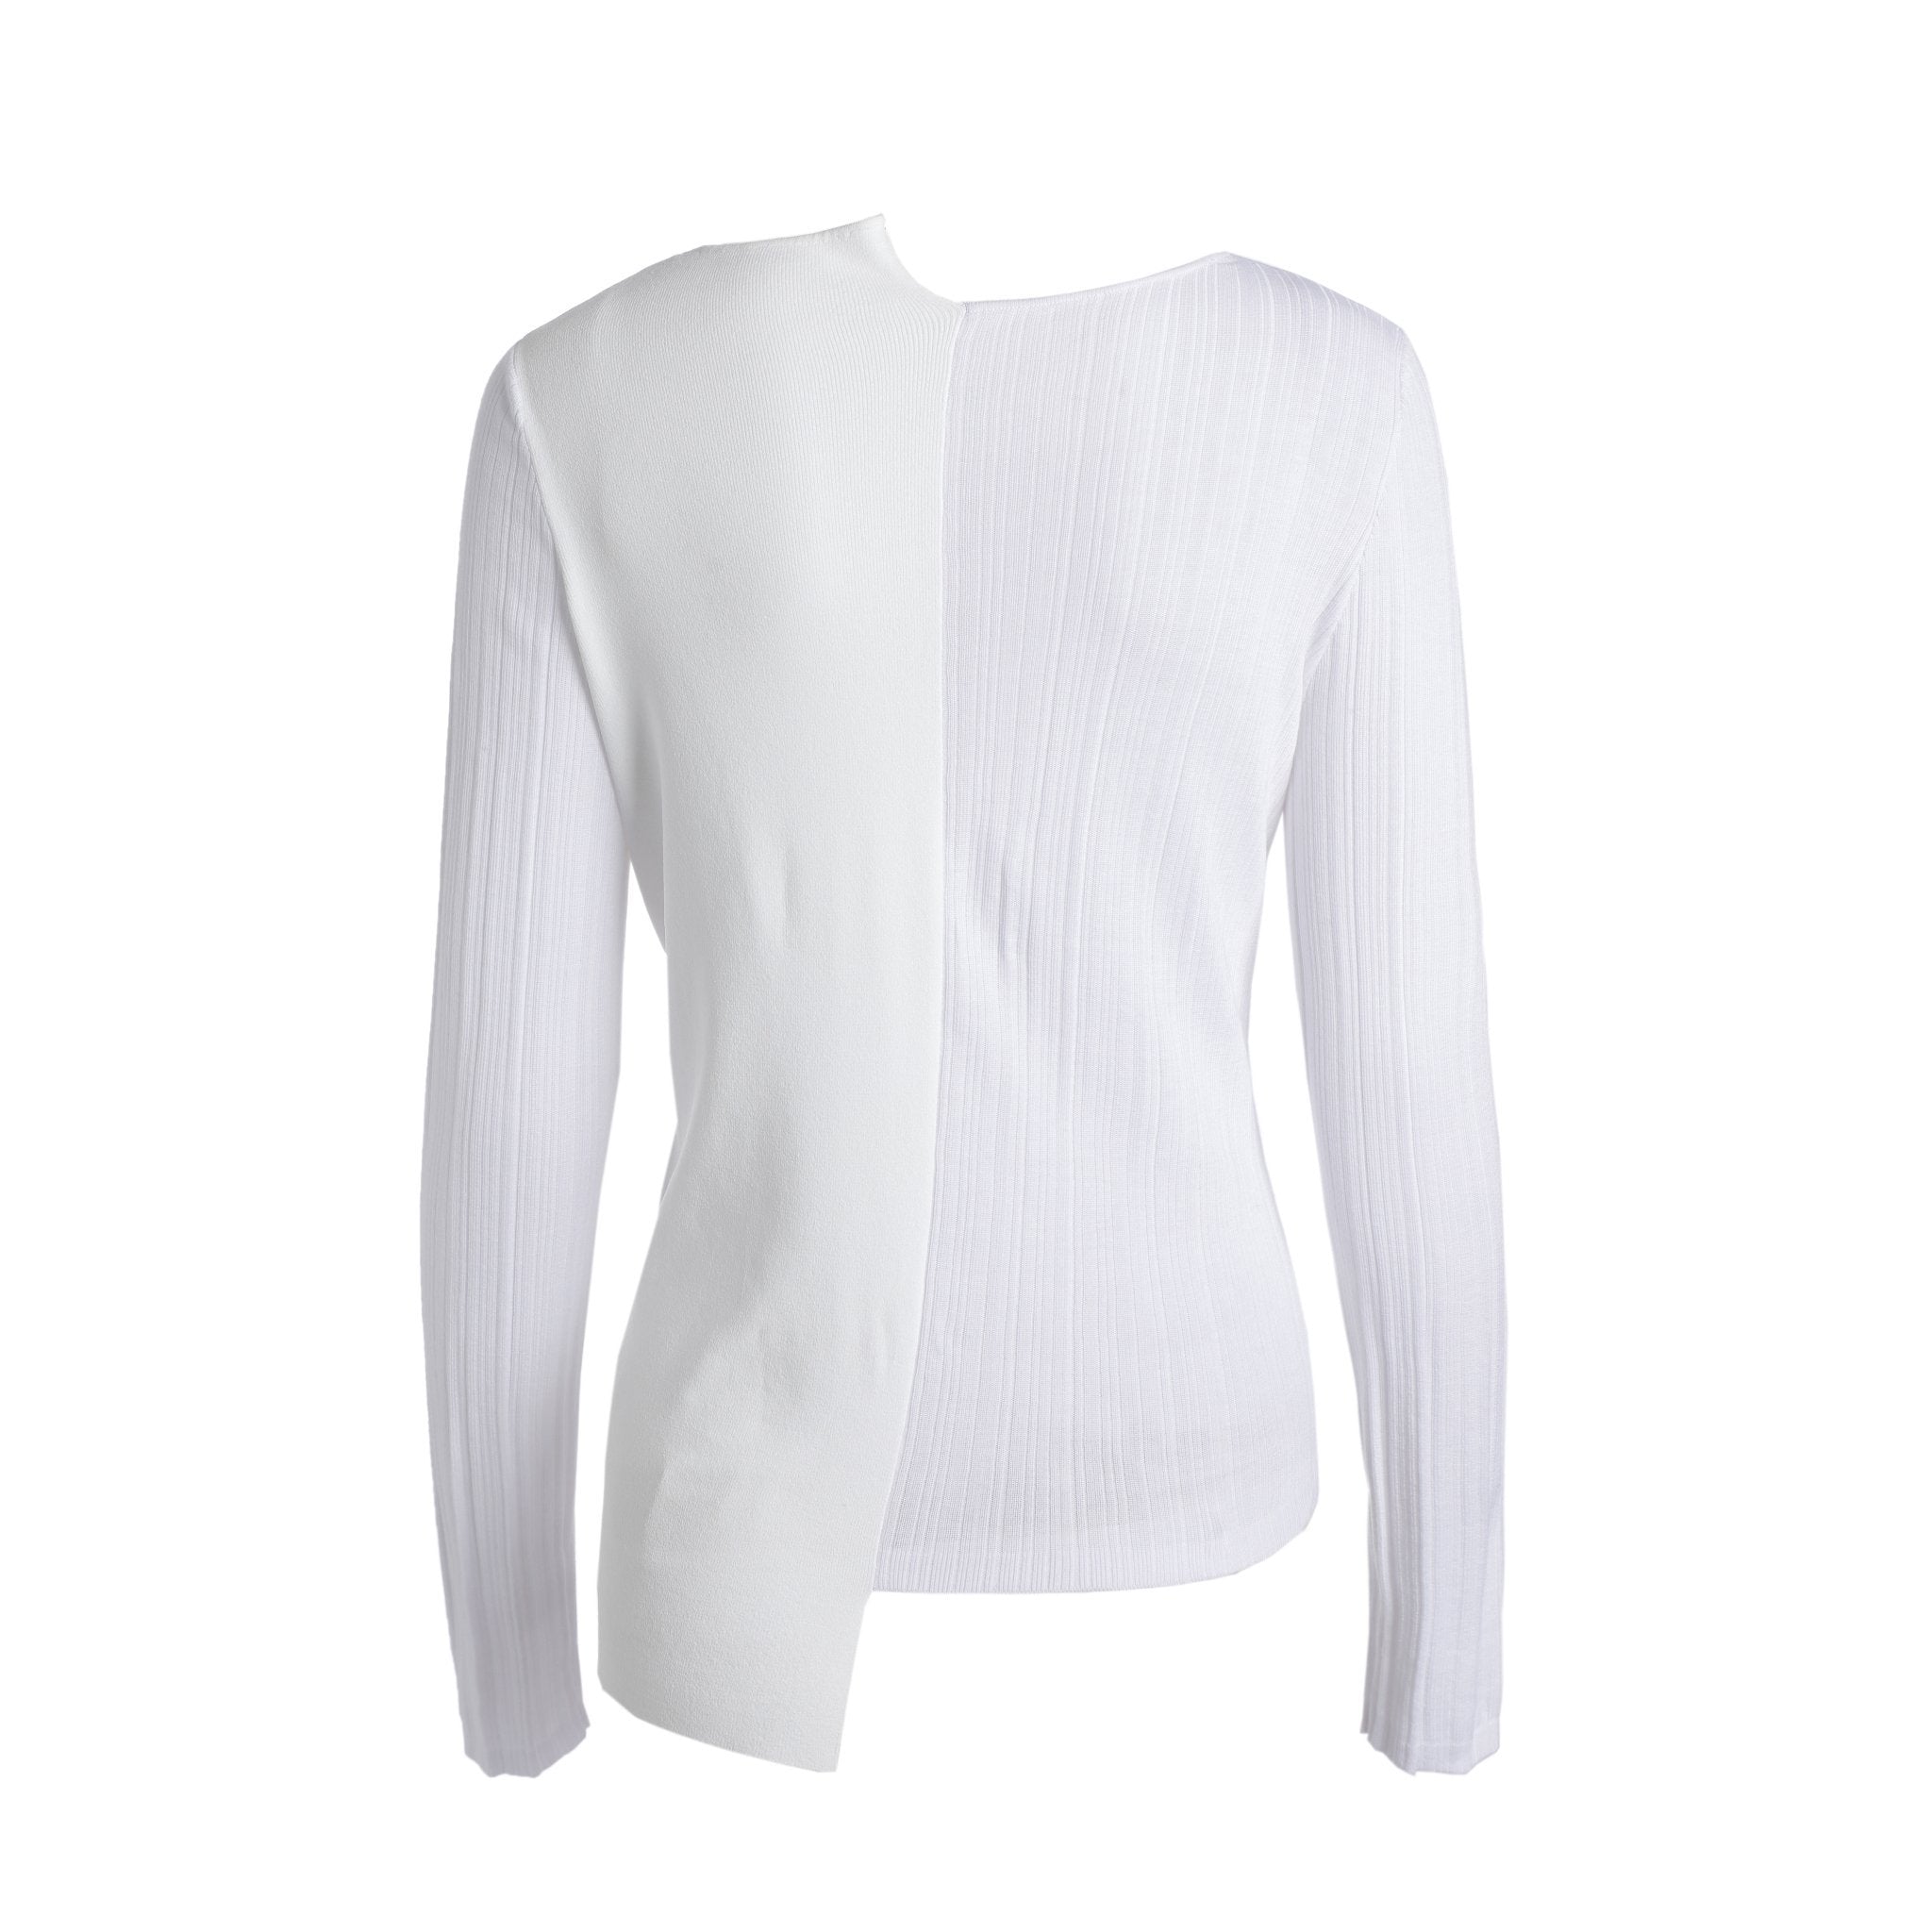 FENGYI TAN White Asymmetric Knitted Top | MADA IN CHINA